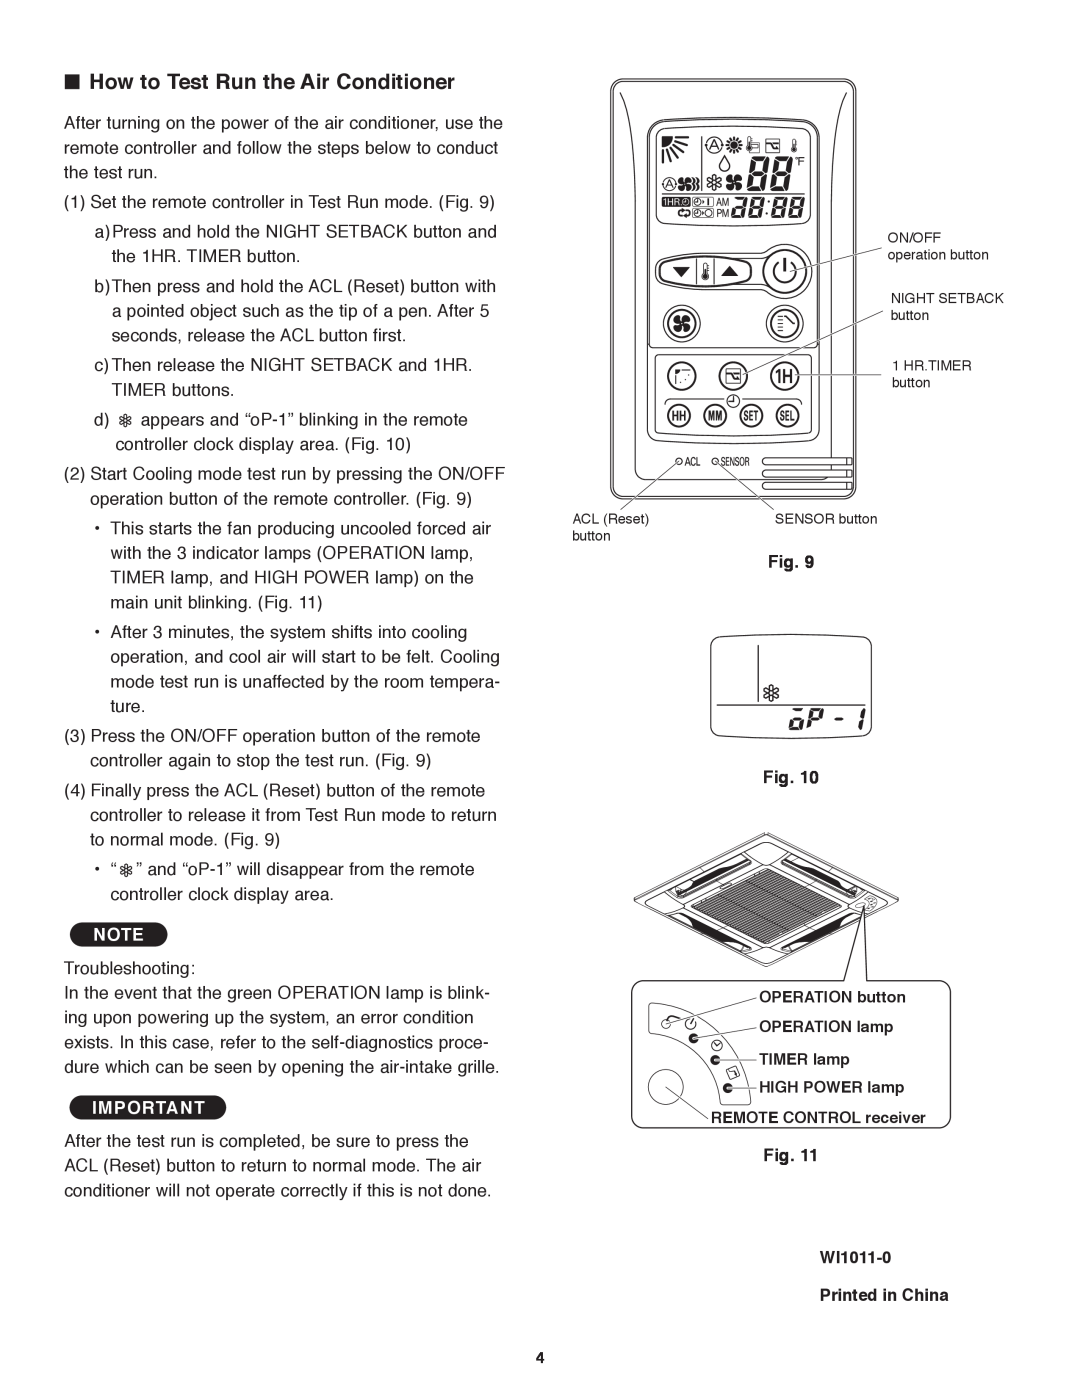 Panasonic R410A service manual How to Test Run the Air Conditioner, Fig. WI1011-0 Printed in China 